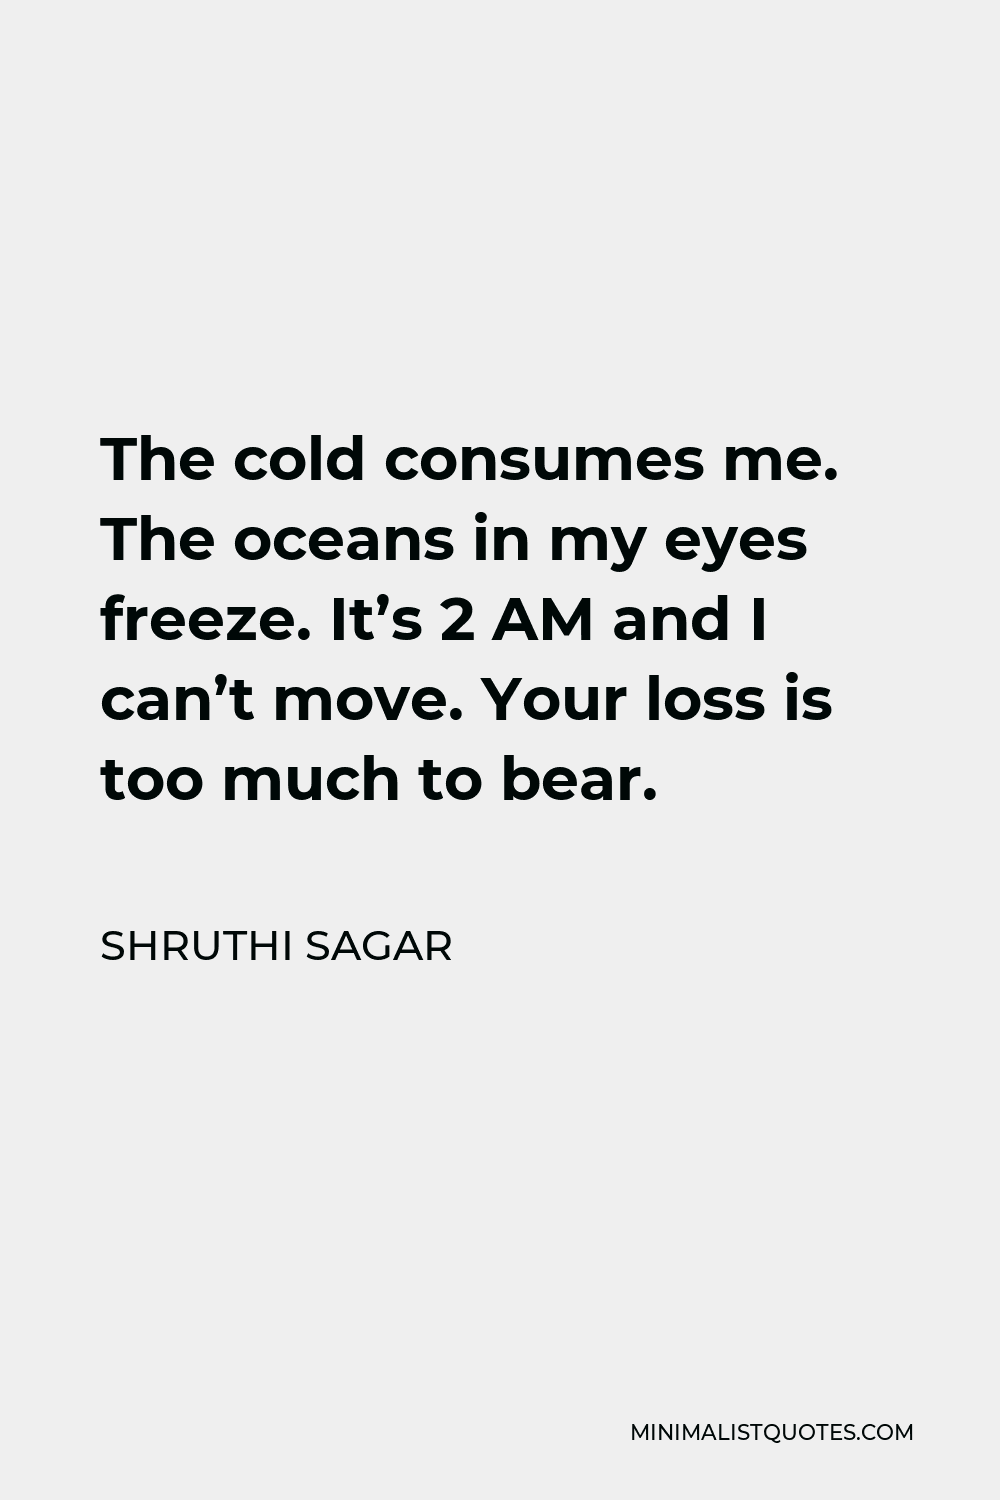 Shruthi Sagar Quote - The cold consumes me. The oceans in my eyes freeze. It’s 2 AM and I can’t move. Your loss is too much to bear.